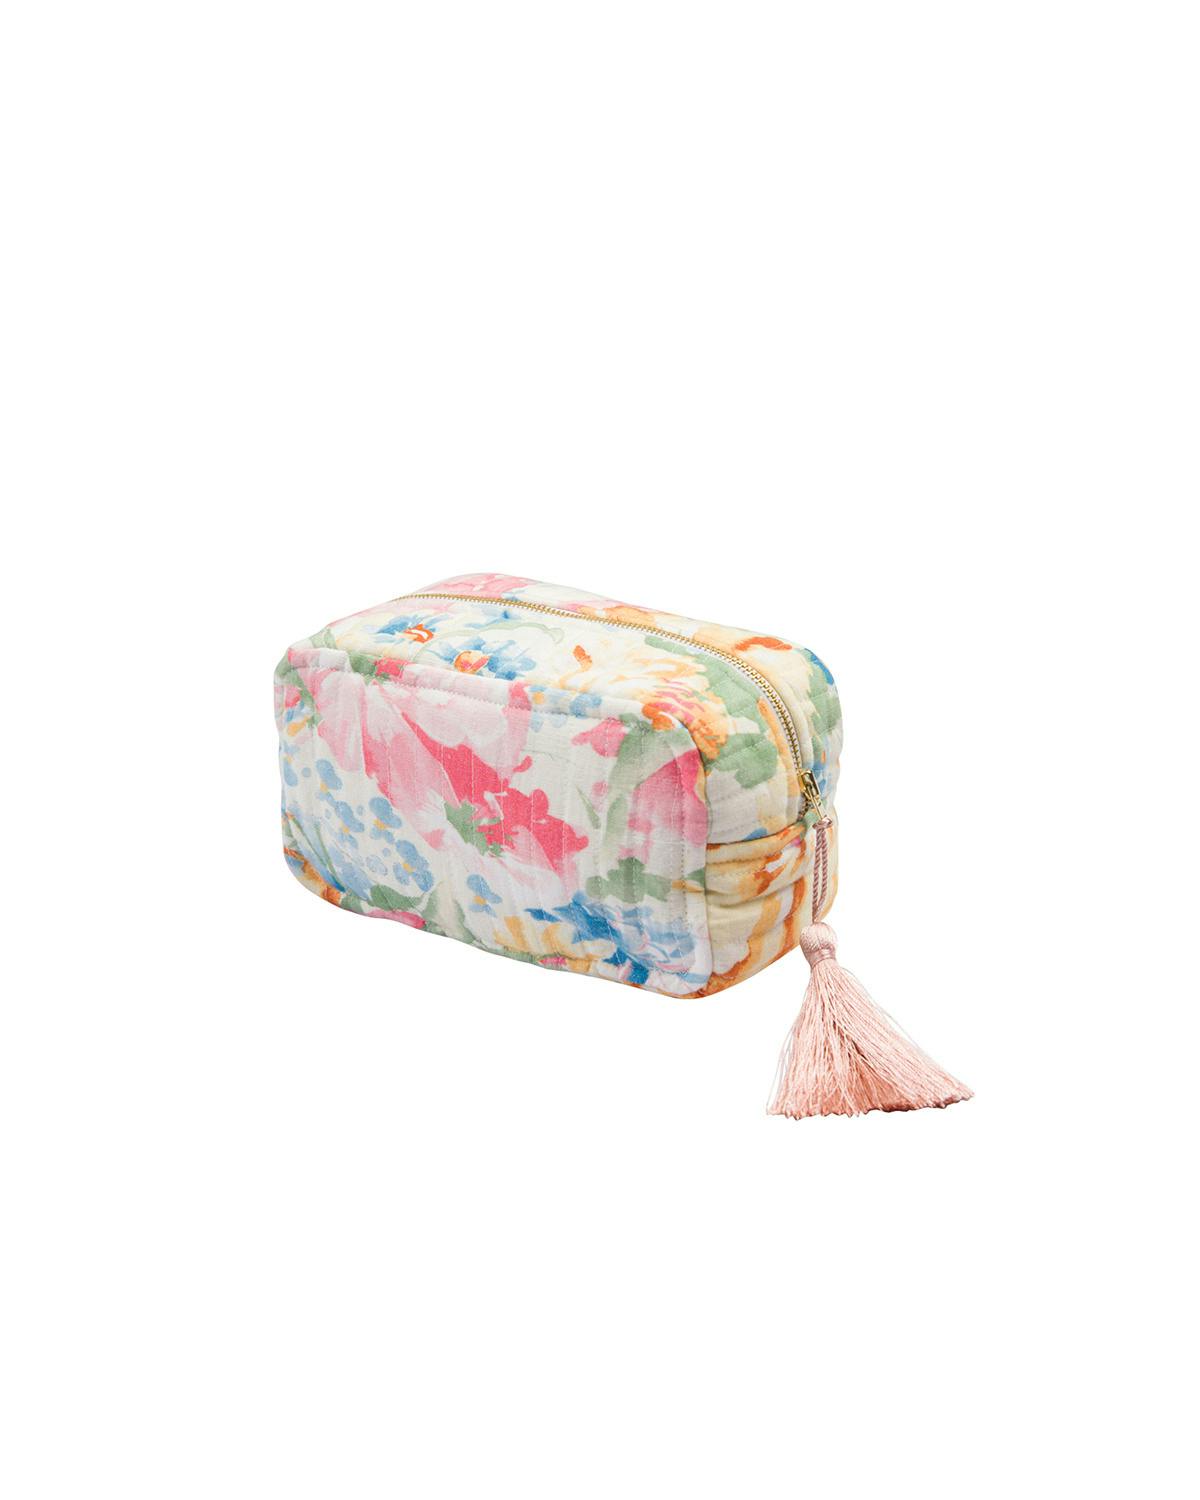 Cosmetic Bag Linen, Pink floral. Image #1